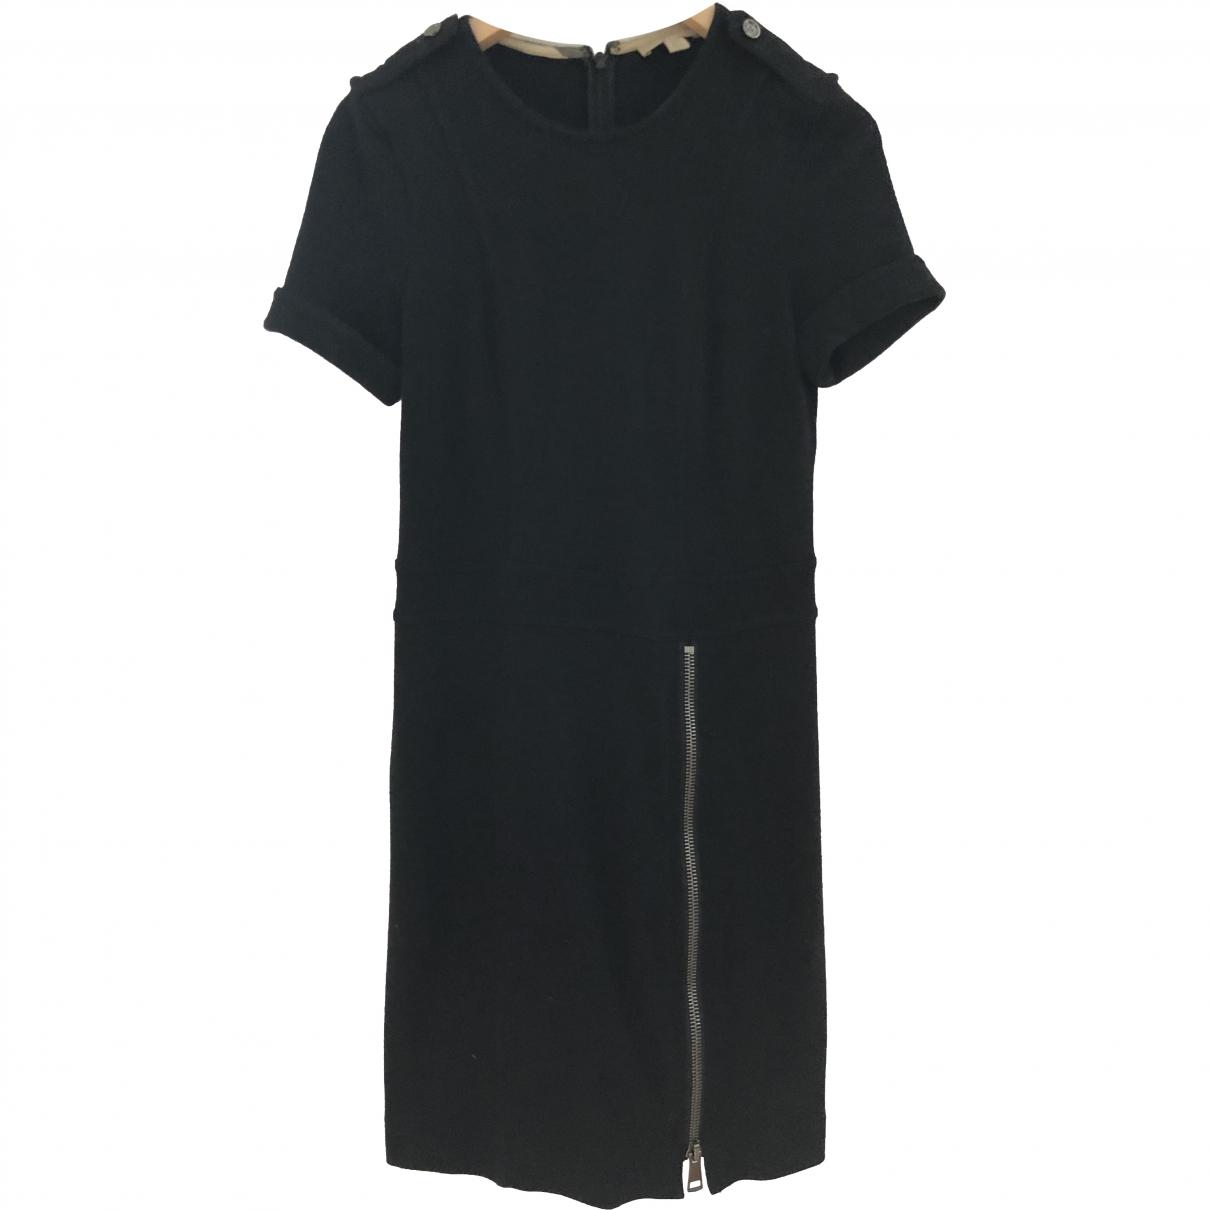 Wool mid-length dress by BURBERRY